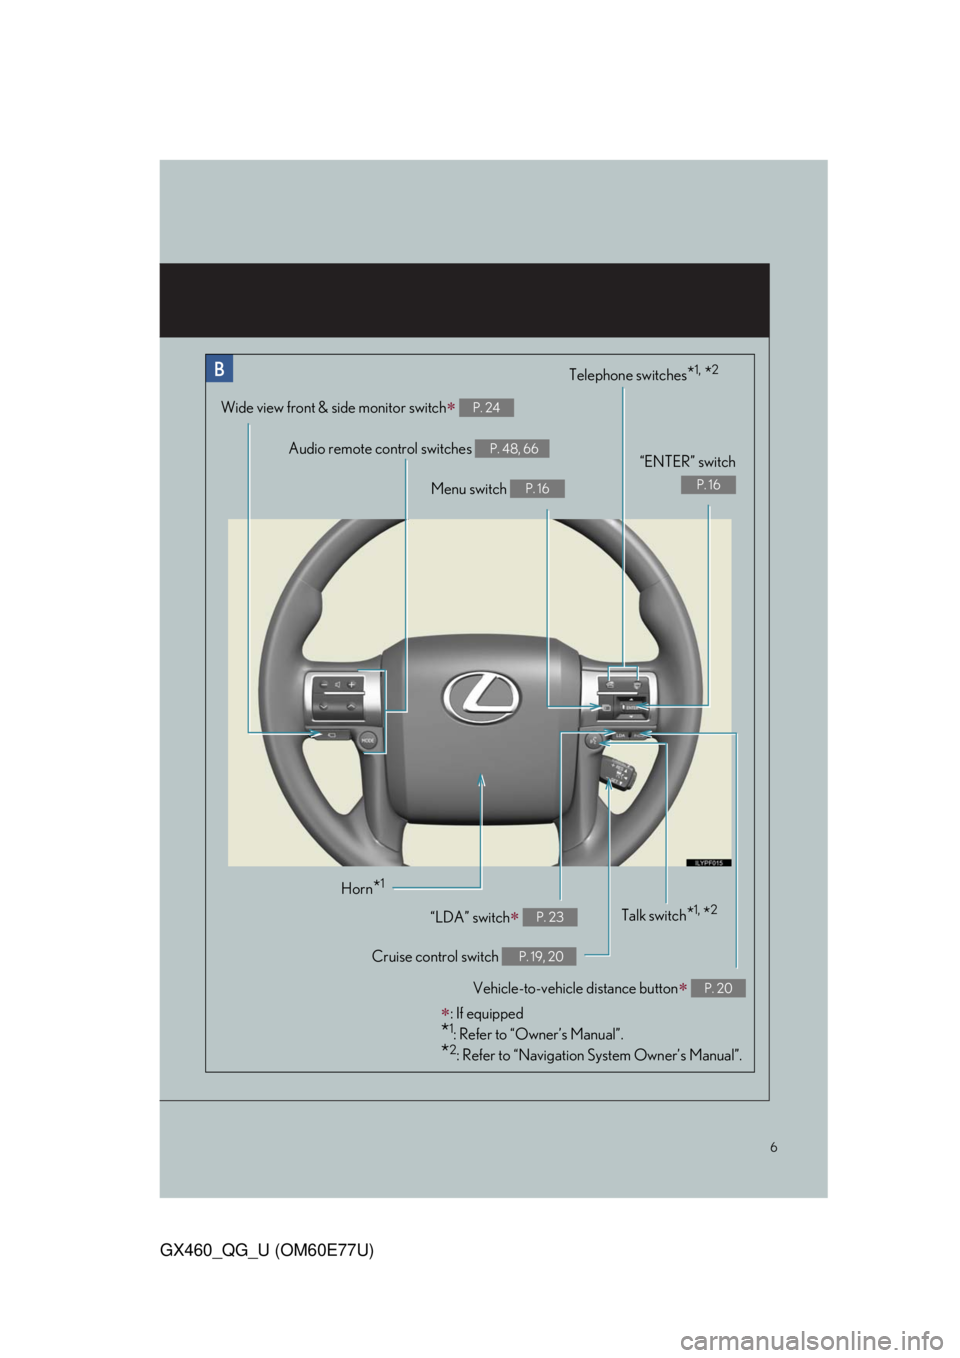 Lexus GX460 2010  Using The Bluetooth Audio System / LEXUS 2010 GX460 OWNERS MANUAL QUICK GUIDE (OM60E77U) 6
GX460_QG_U (OM60E77U)
Audio remote control switches P. 48, 66
Telephone switches*1, *2
Menu switch P. 16
“ENTER” switch
P. 16
Wide view front & side monitor switch P. 24
Horn*1
Talk switch*1,